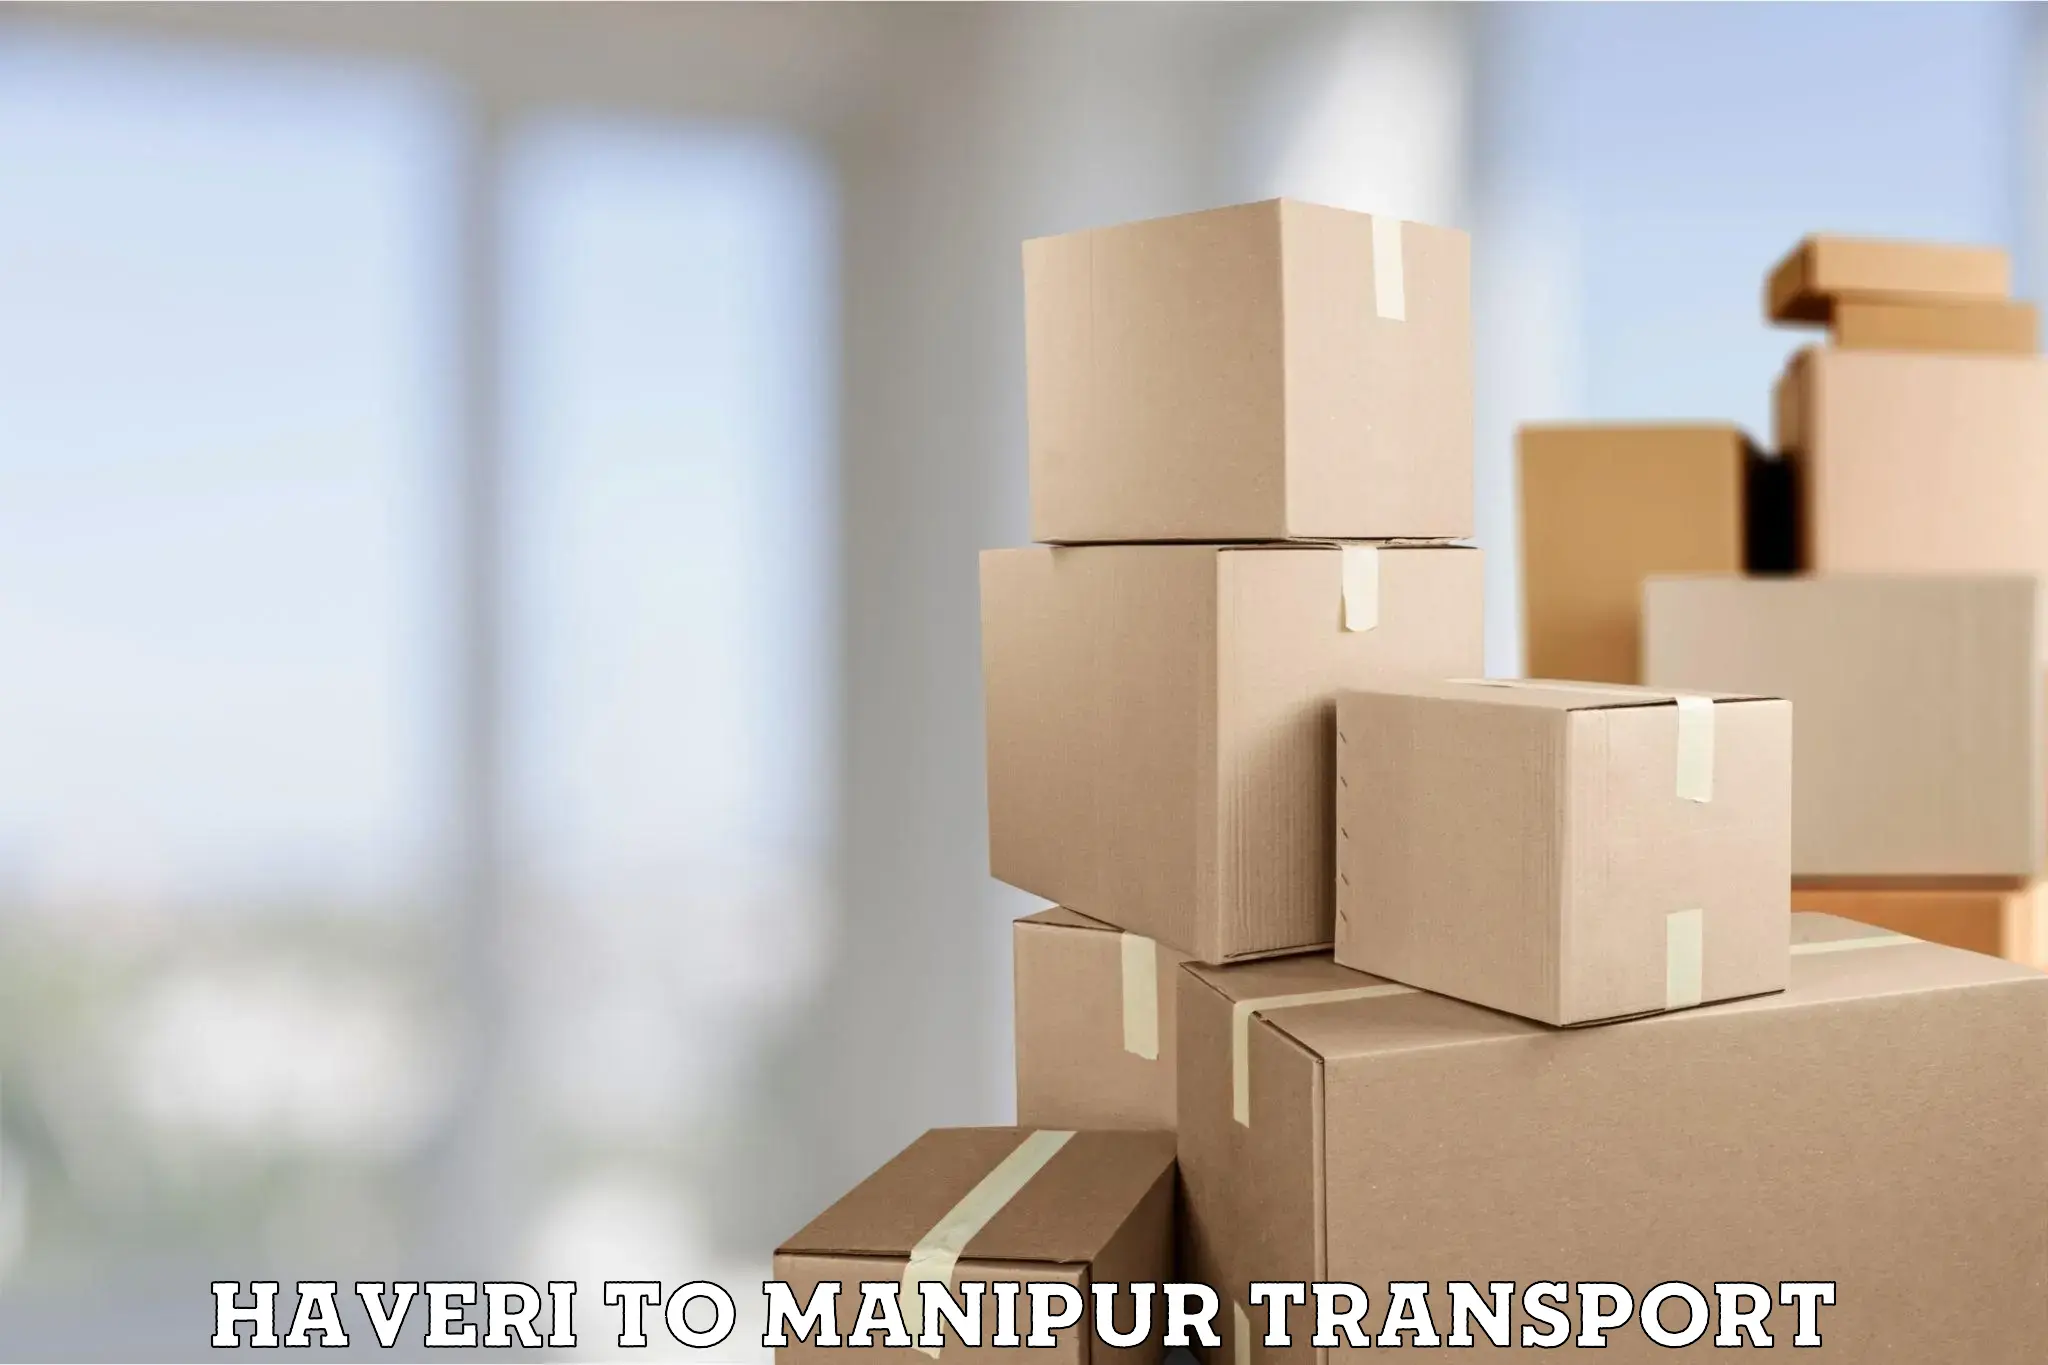 Delivery service Haveri to Manipur